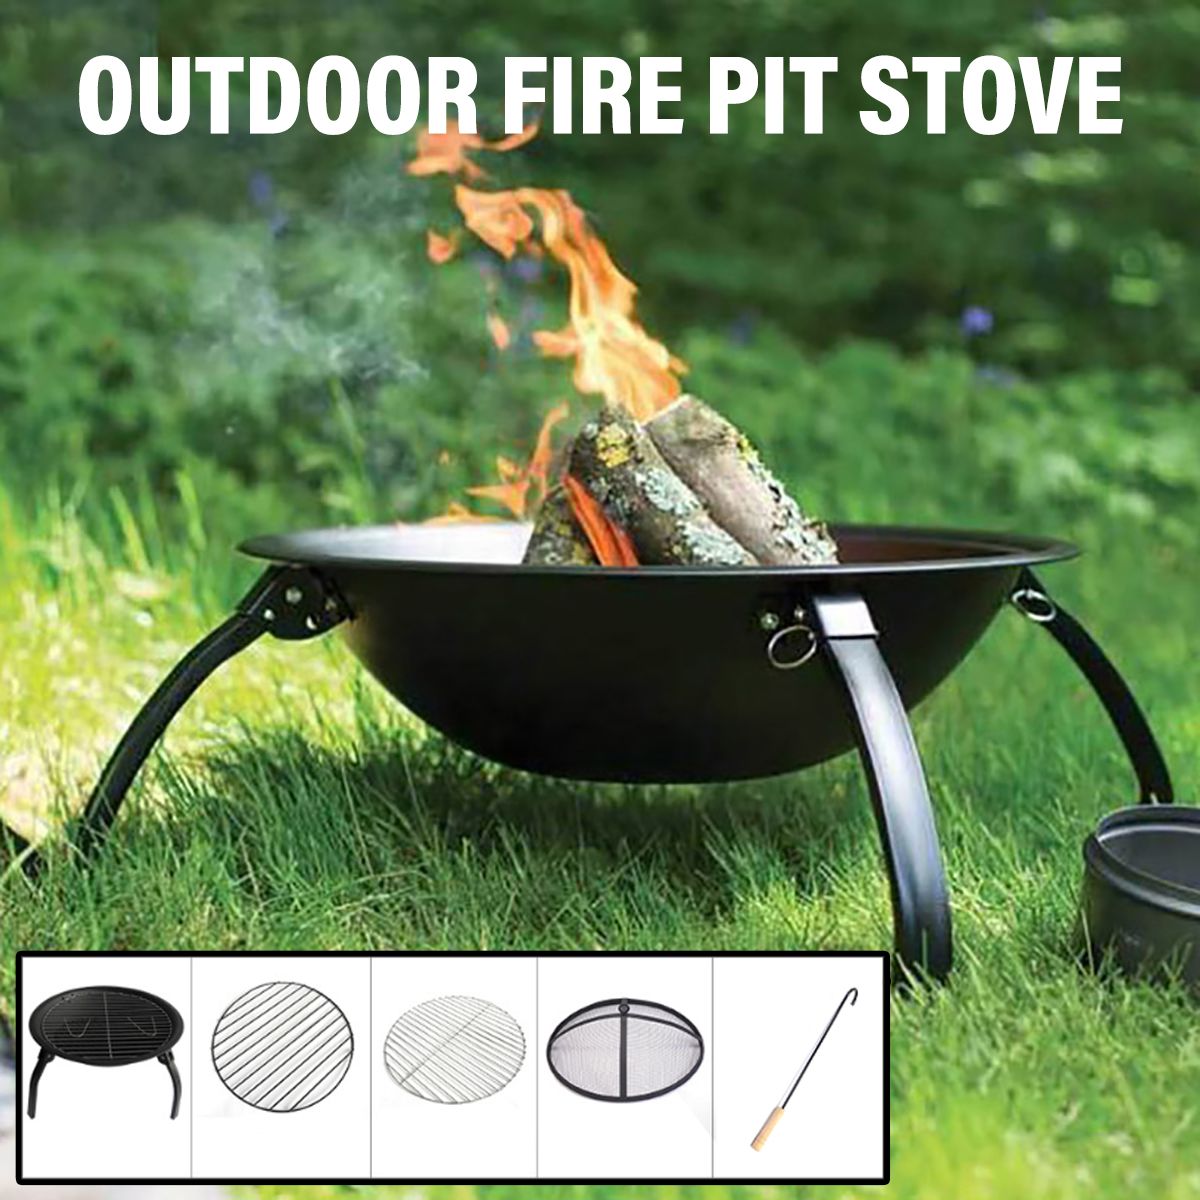 55cm-Outdoor-Fire-Pit-Garden-Patio-Wood-Log-Burner-BBQ-Camping-Brazier-Stove-1733717